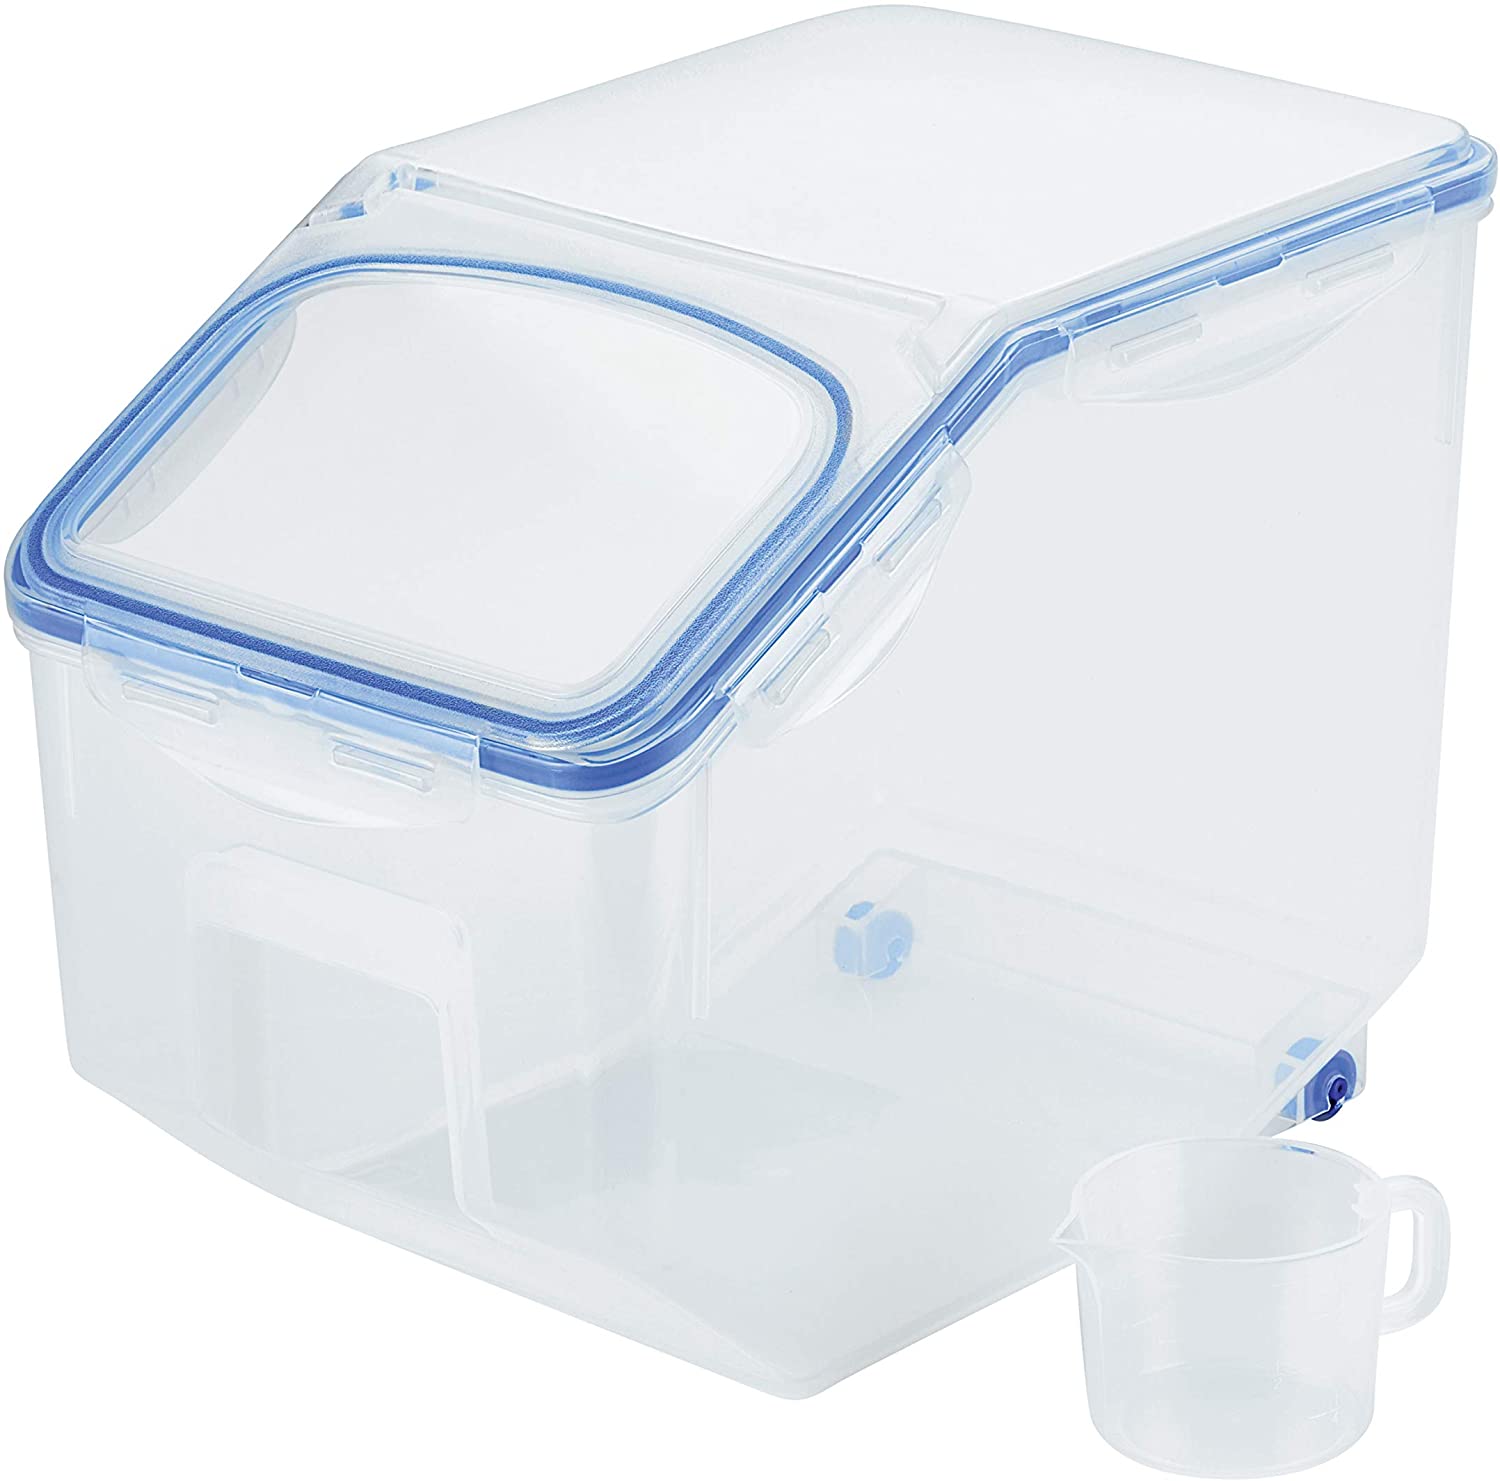 Hpl510 50.7-cup Easy Essentials Pantry Food Storage Container With Flip Lid & Serving Cup, Clear